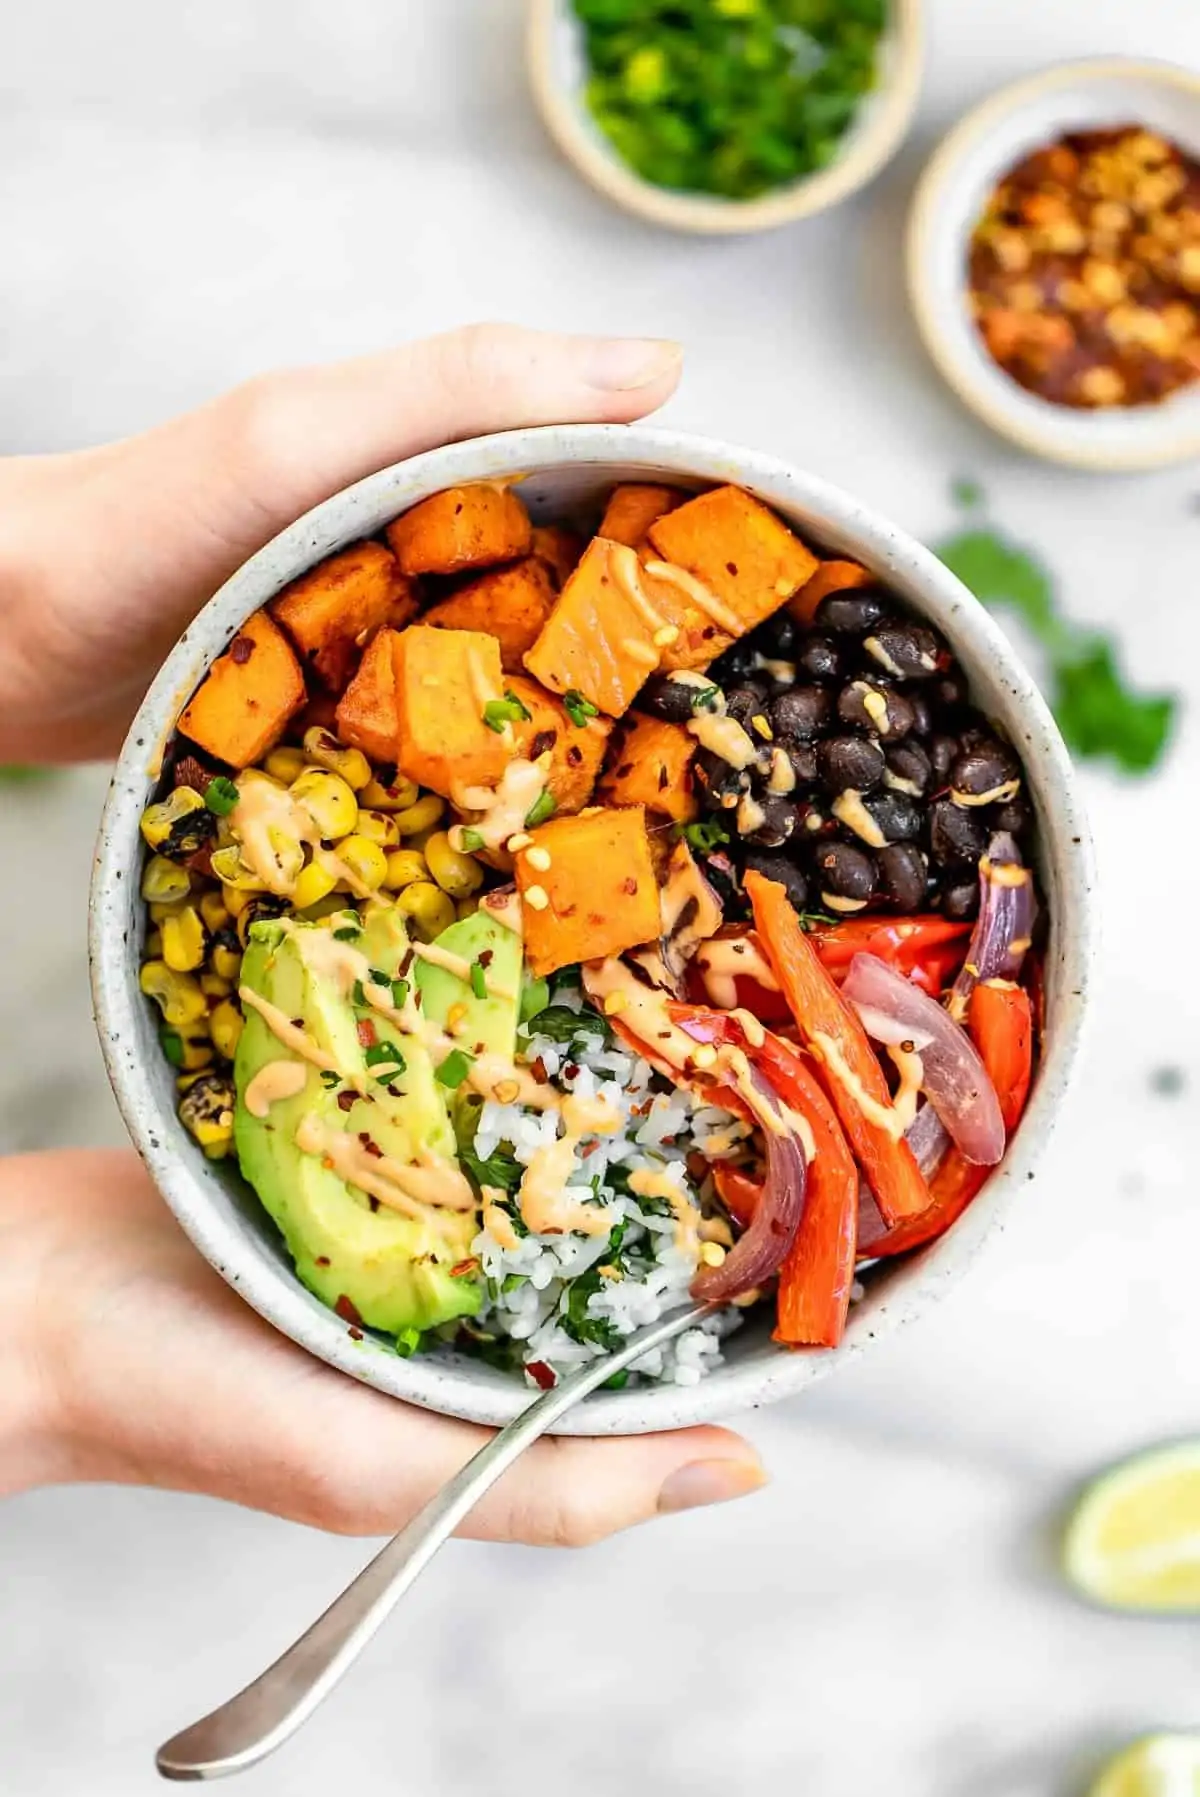 Hand holding the burrito bowl with roasted veggies and sweet potato.